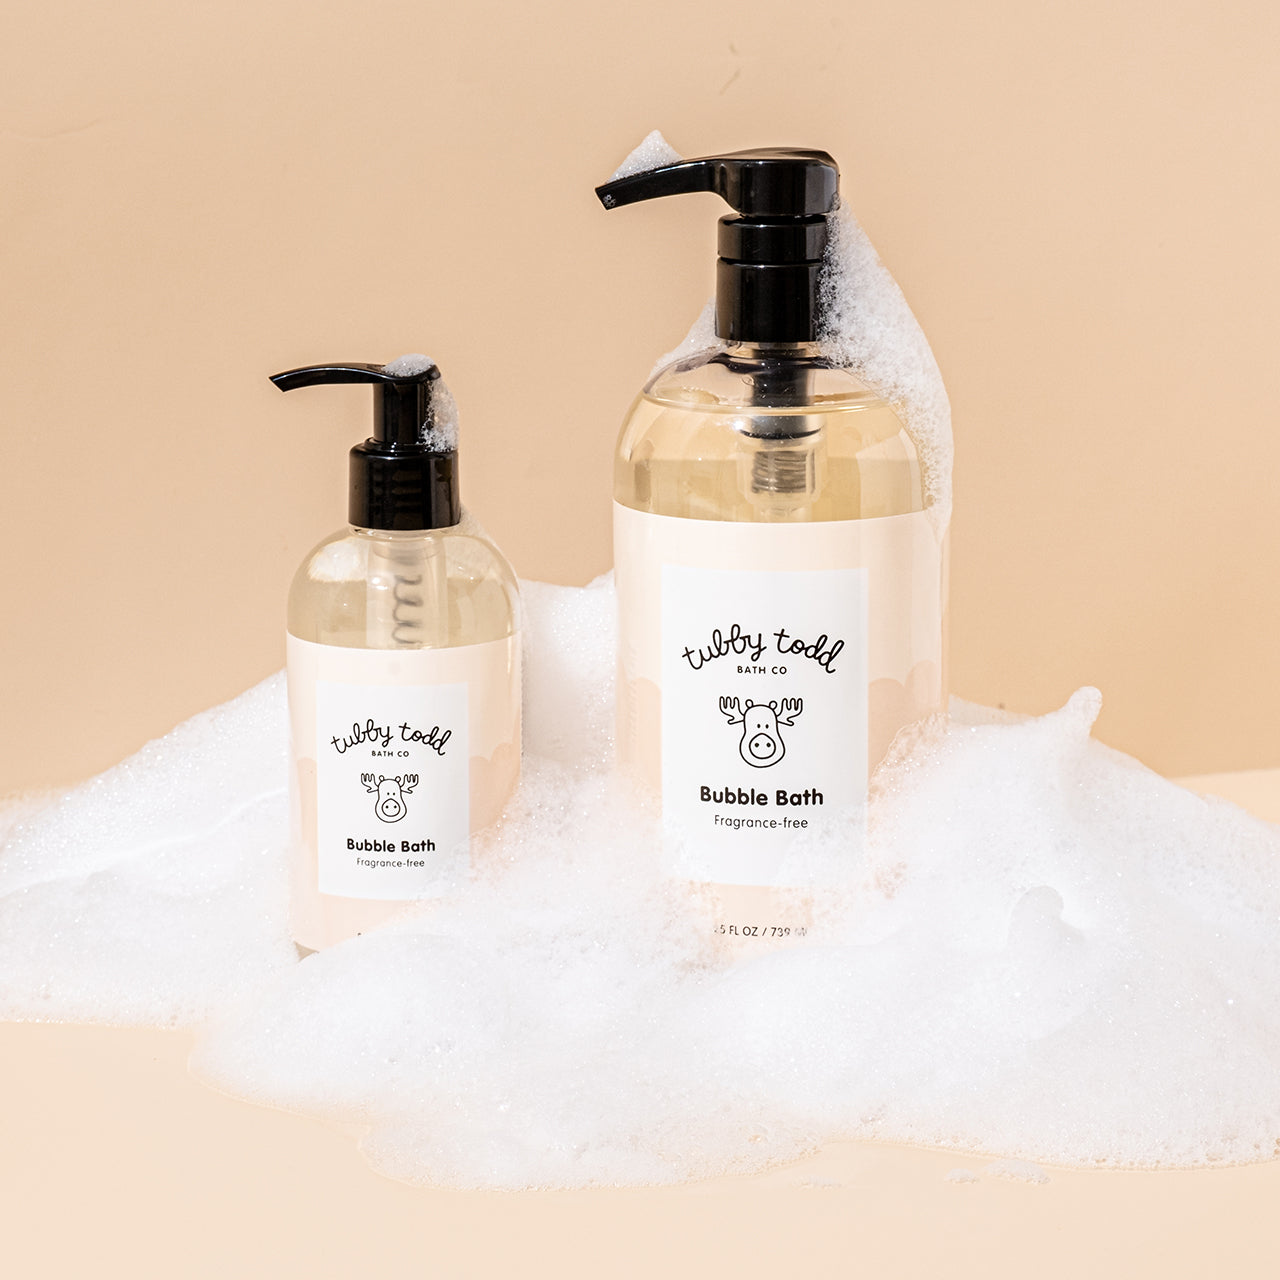 8.5oz and 25oz Fragrance-free bubble bath bottles are standing surrounded by bubbles.